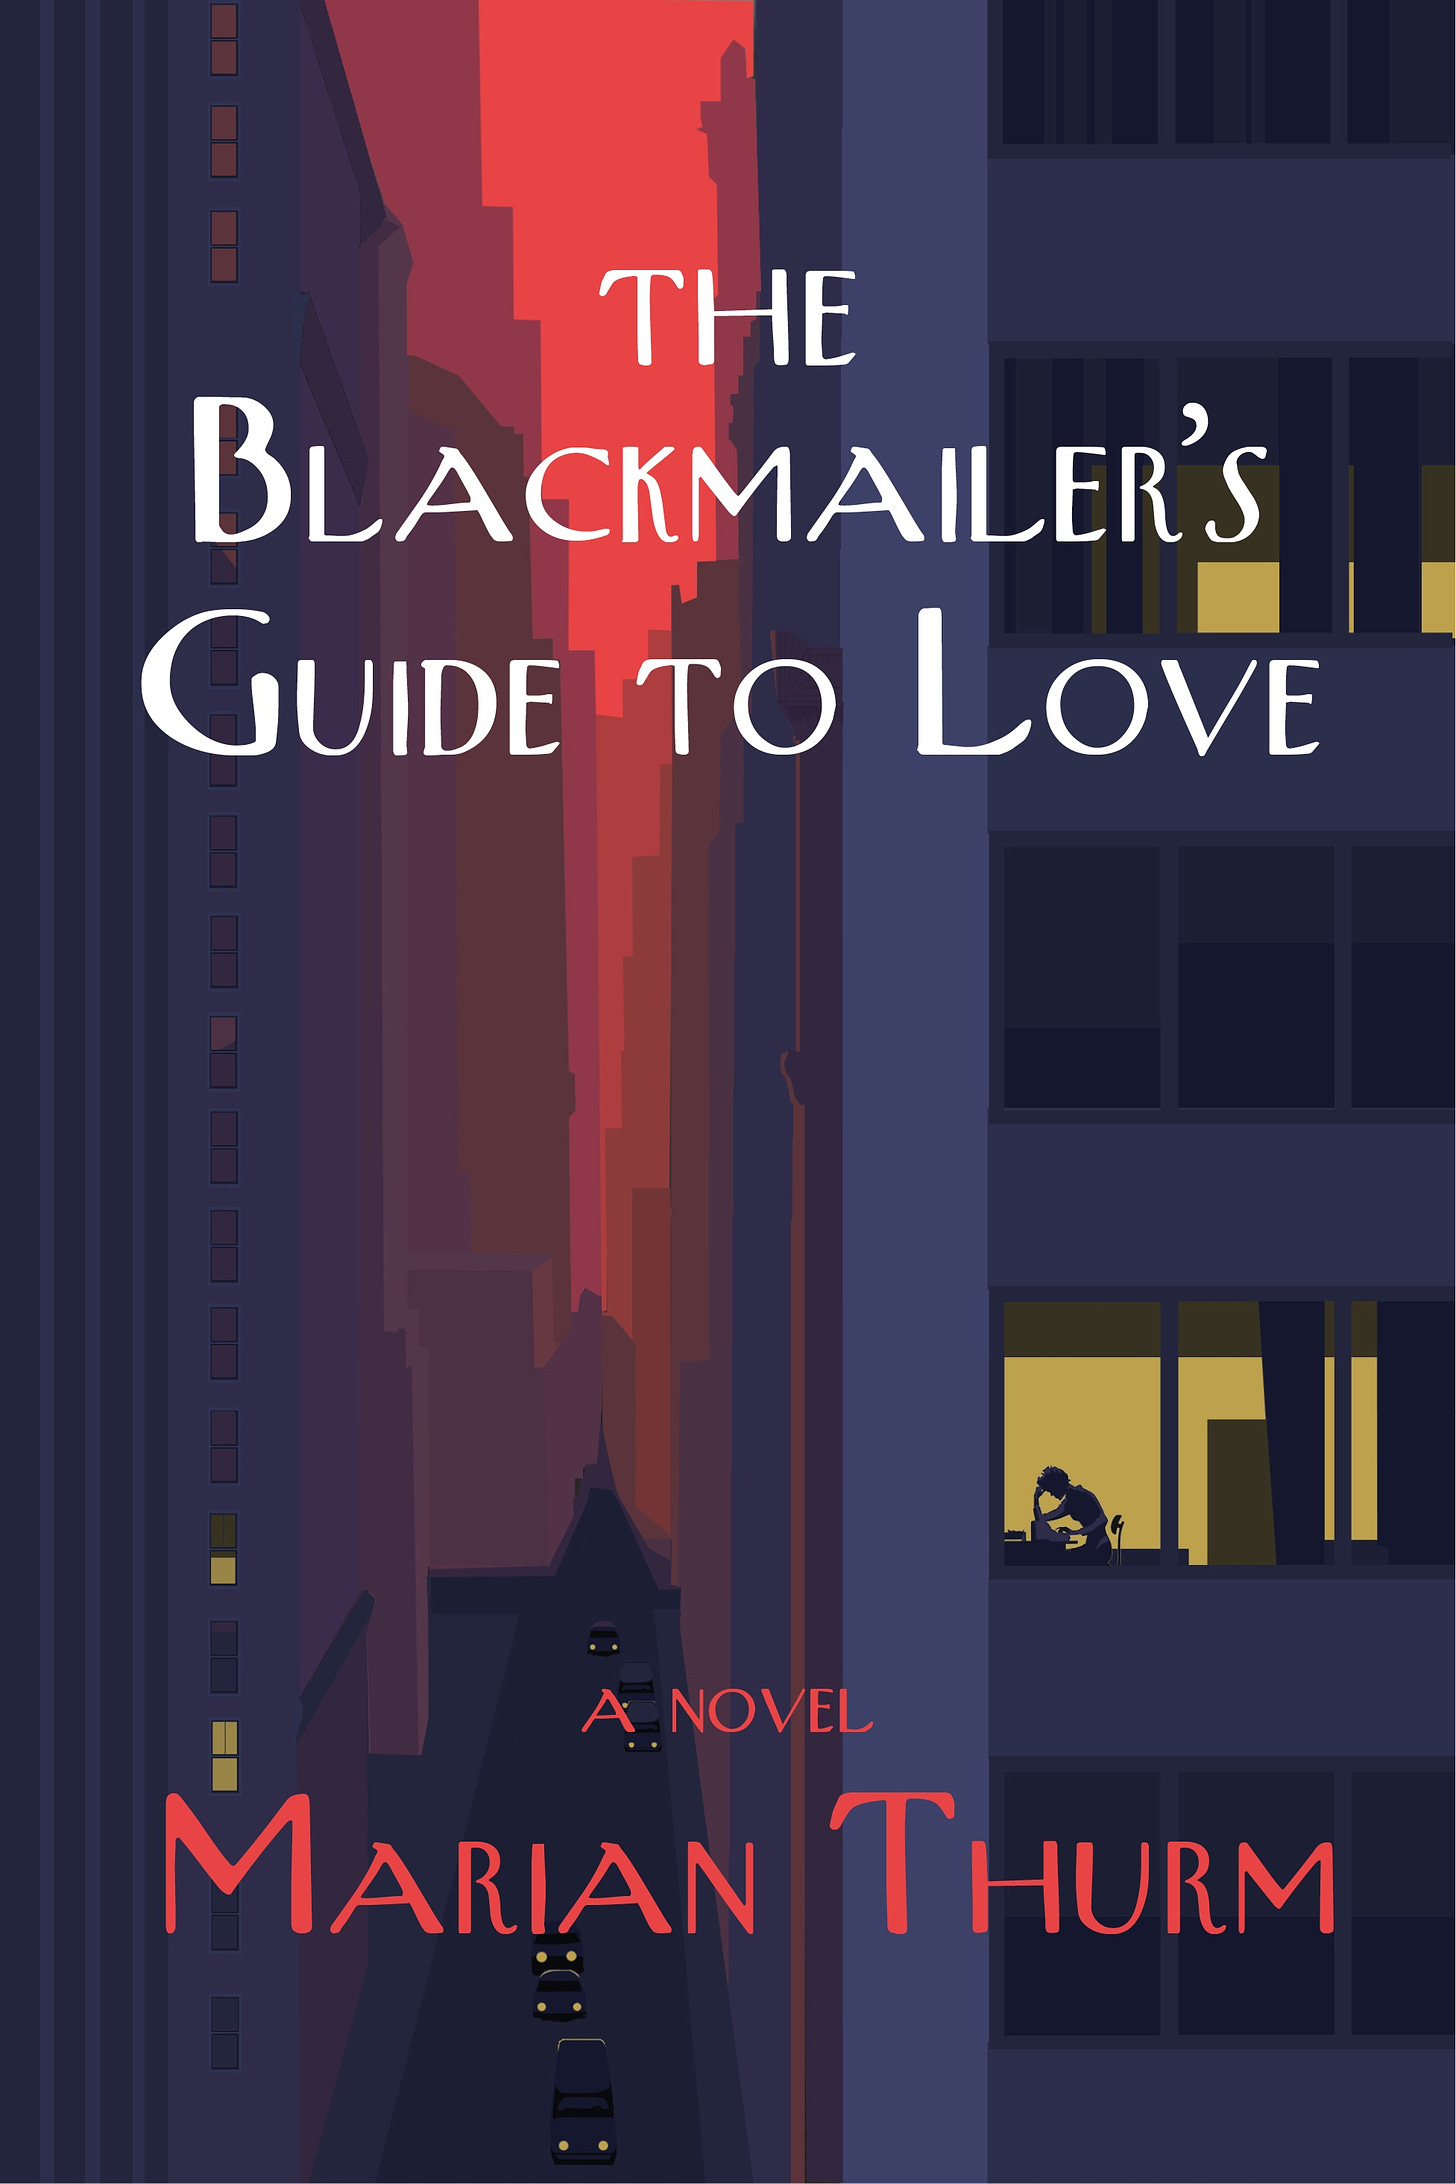 The cover of Marian Thurm’s novel, The Blackmailer’s Guide to Love. The cover is a stylized drawing of a New York City street.